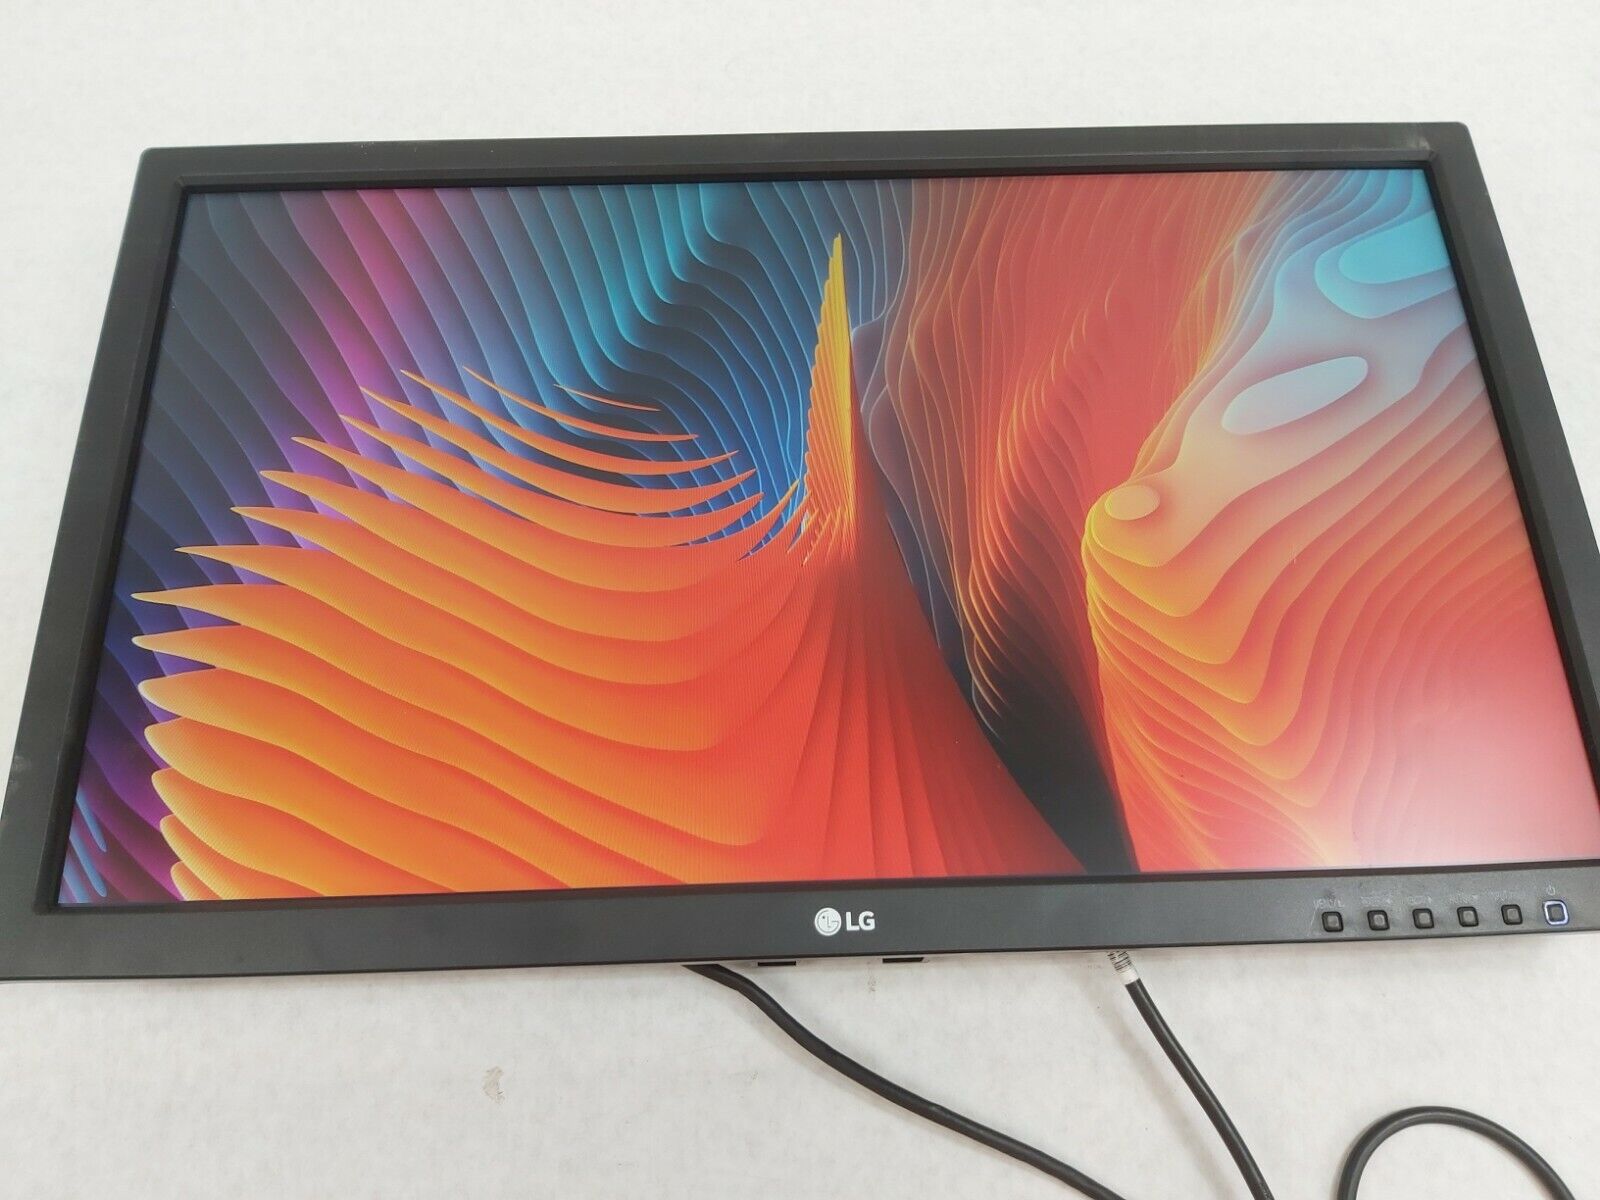 LG 24MB35DM-B 24" LED LCD Monitor - 16:9 - 5 Ms Grade C Power Cord Included